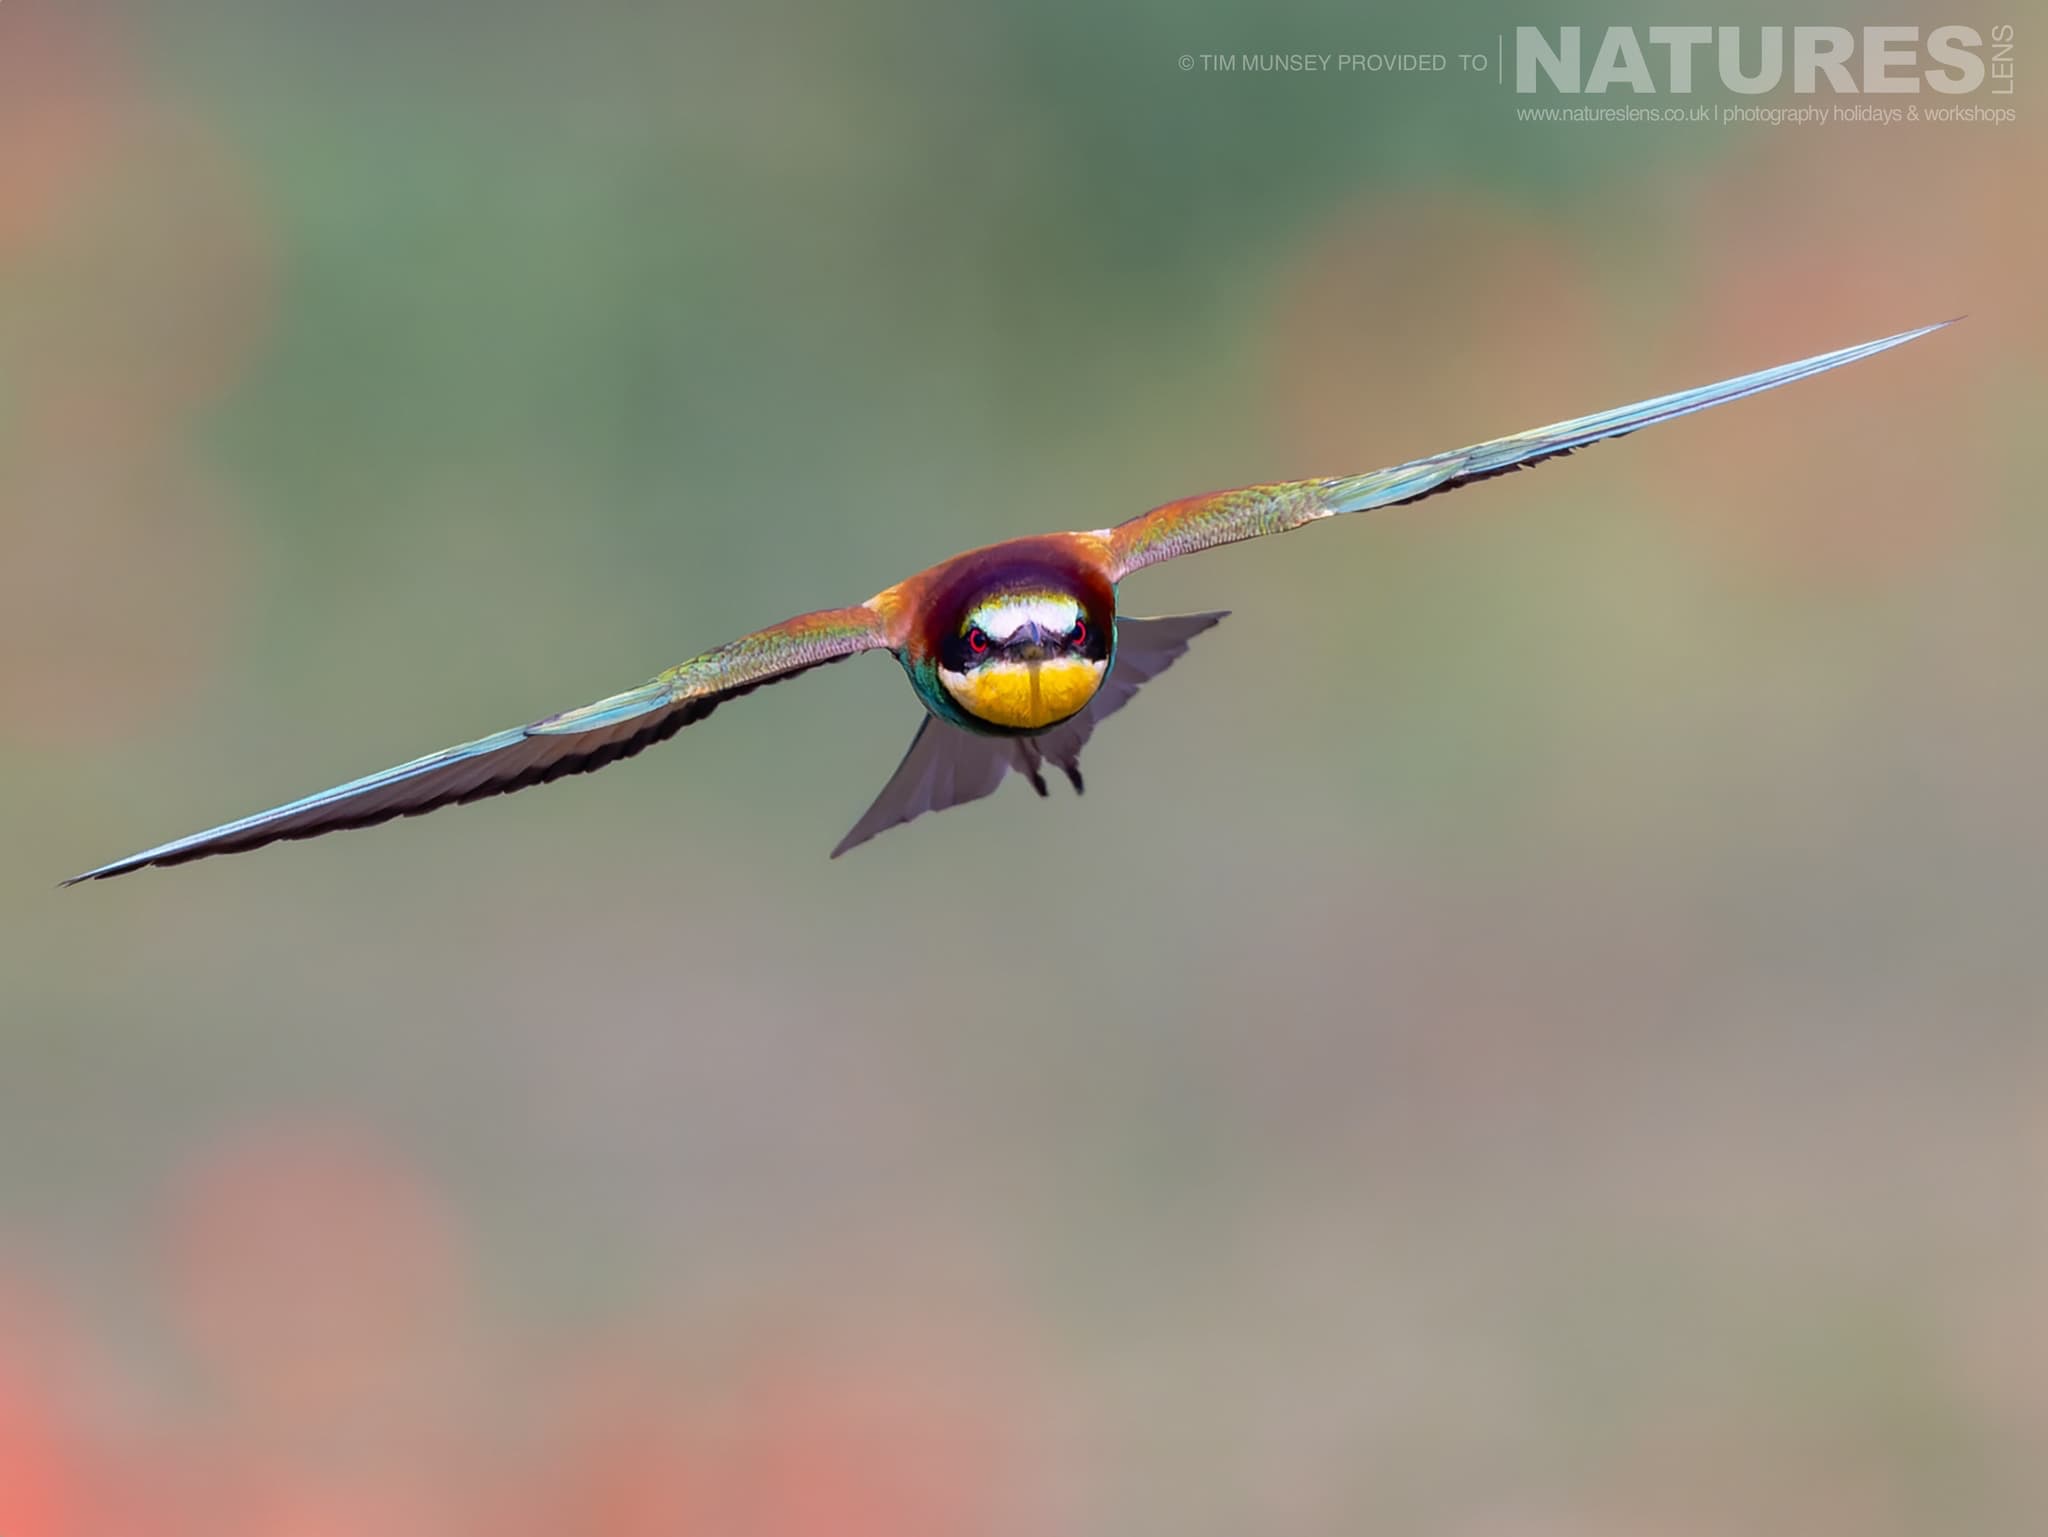 A European Bee Eater In Flight Photographed At Bence Máté's Hides In Hungary During the Natureslens Photography Hides of Hungary Holiday